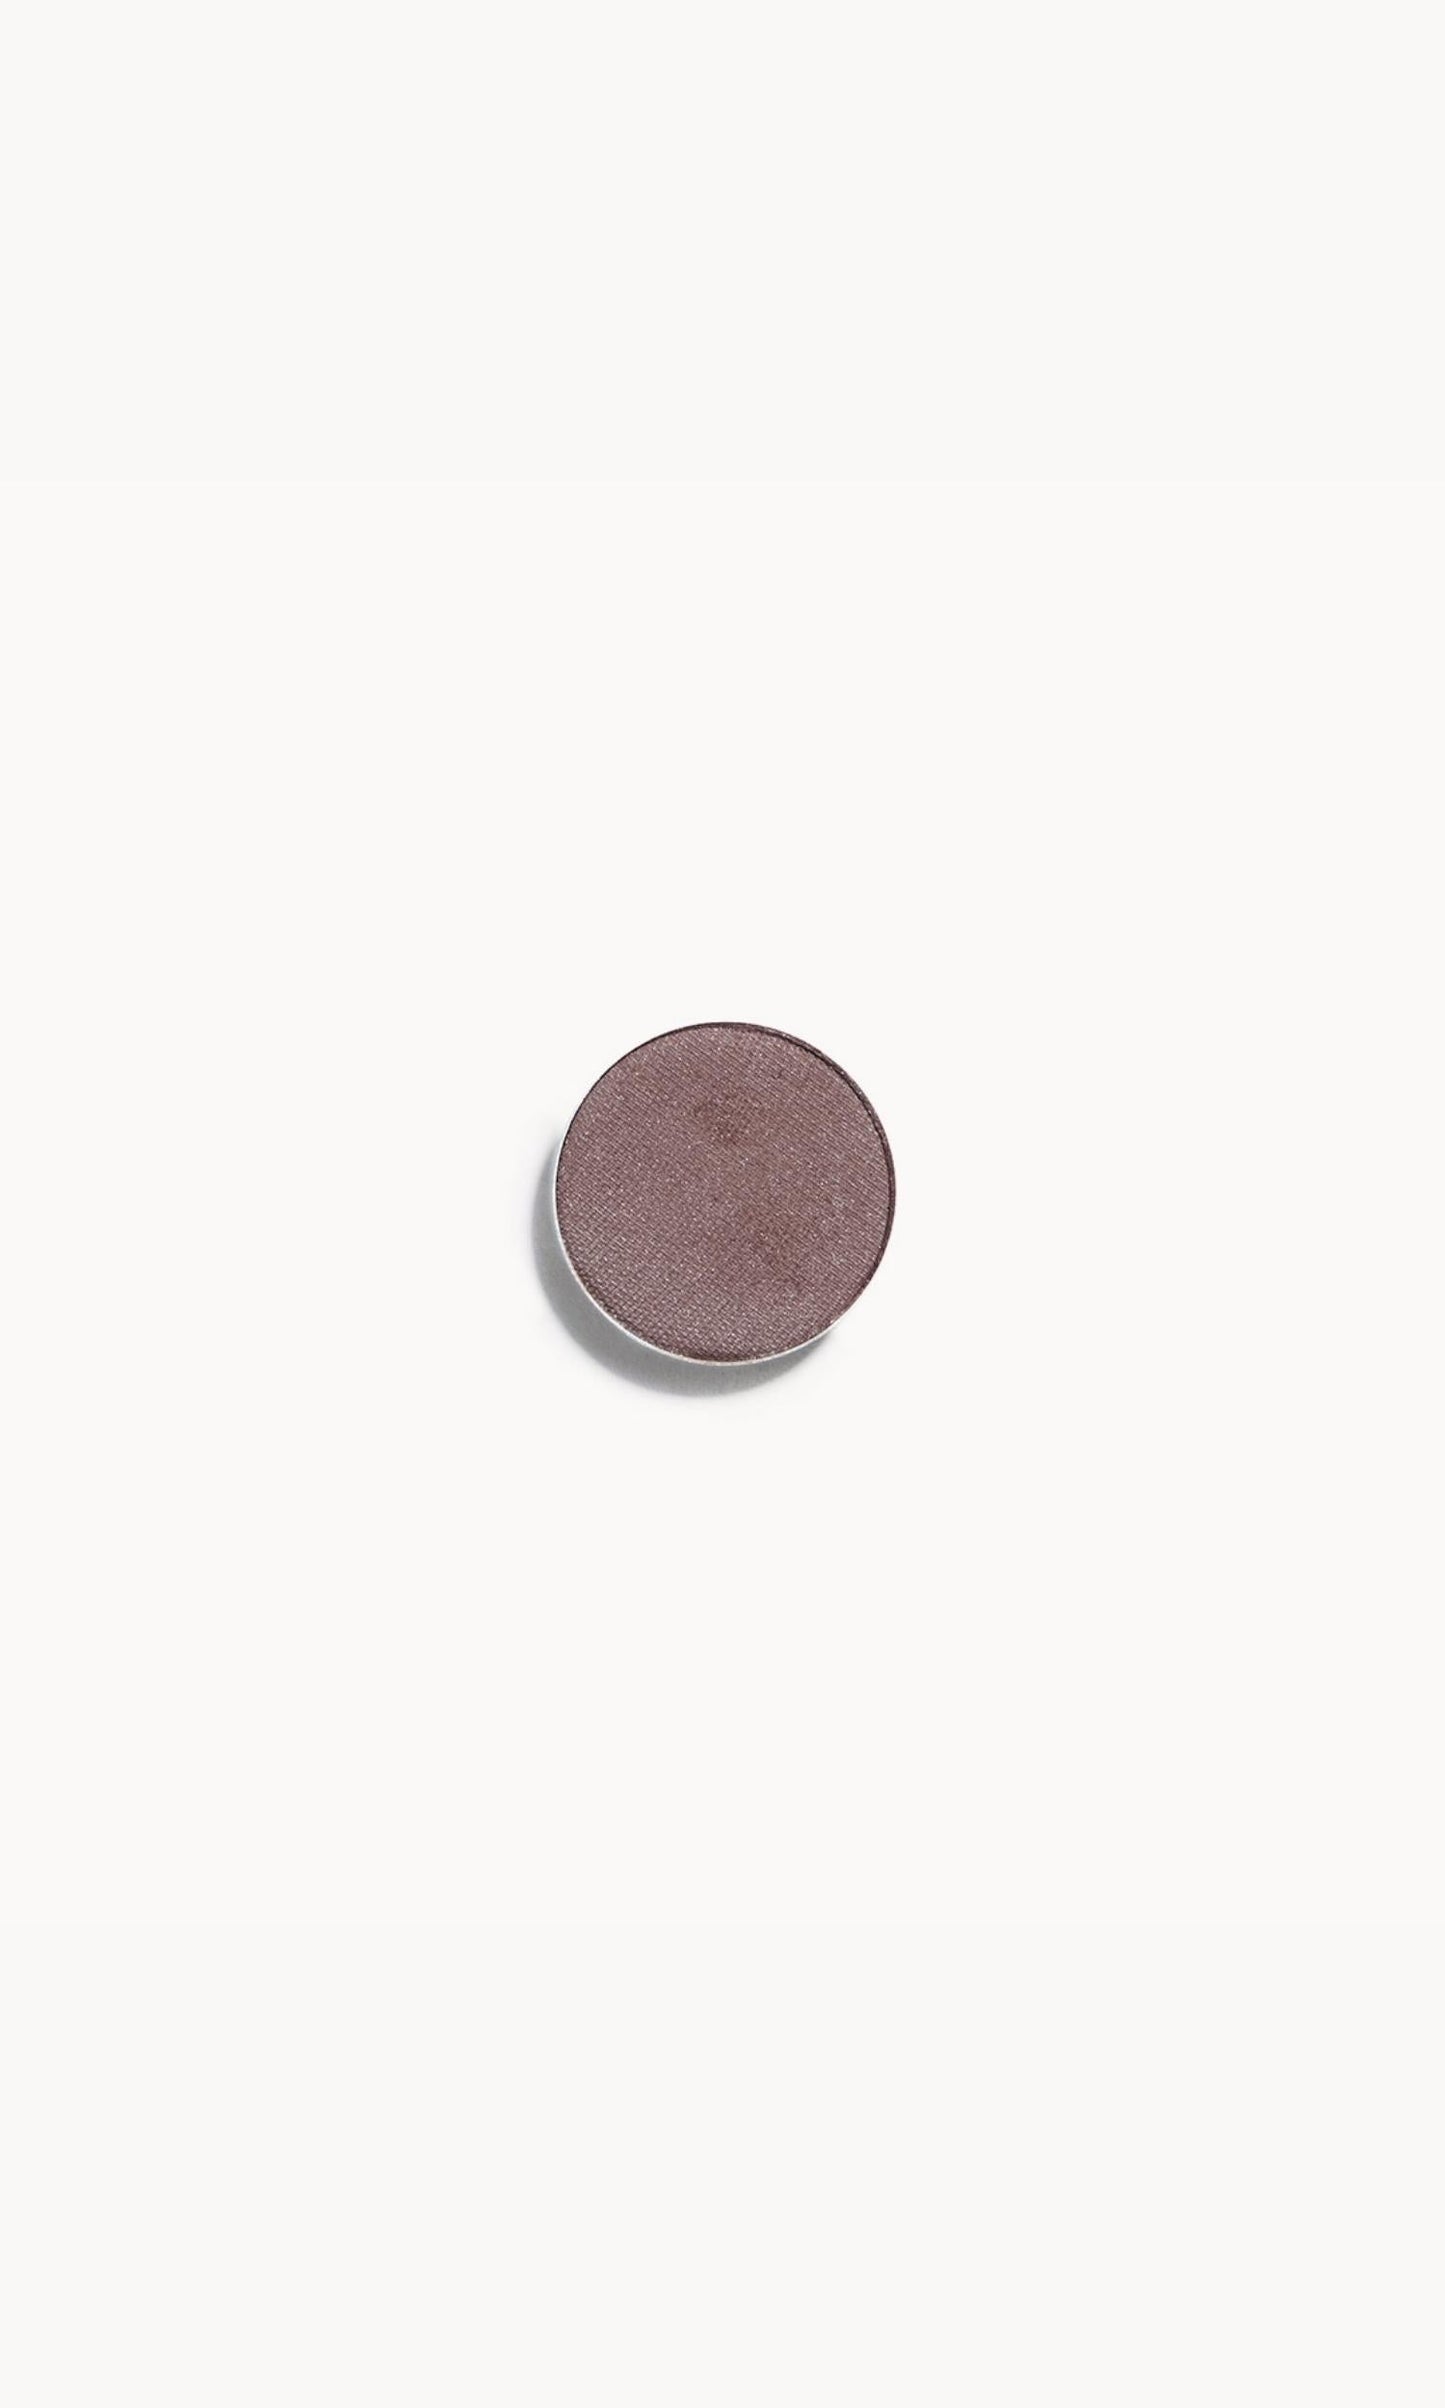 A circle of taupe eye shadow on a white background